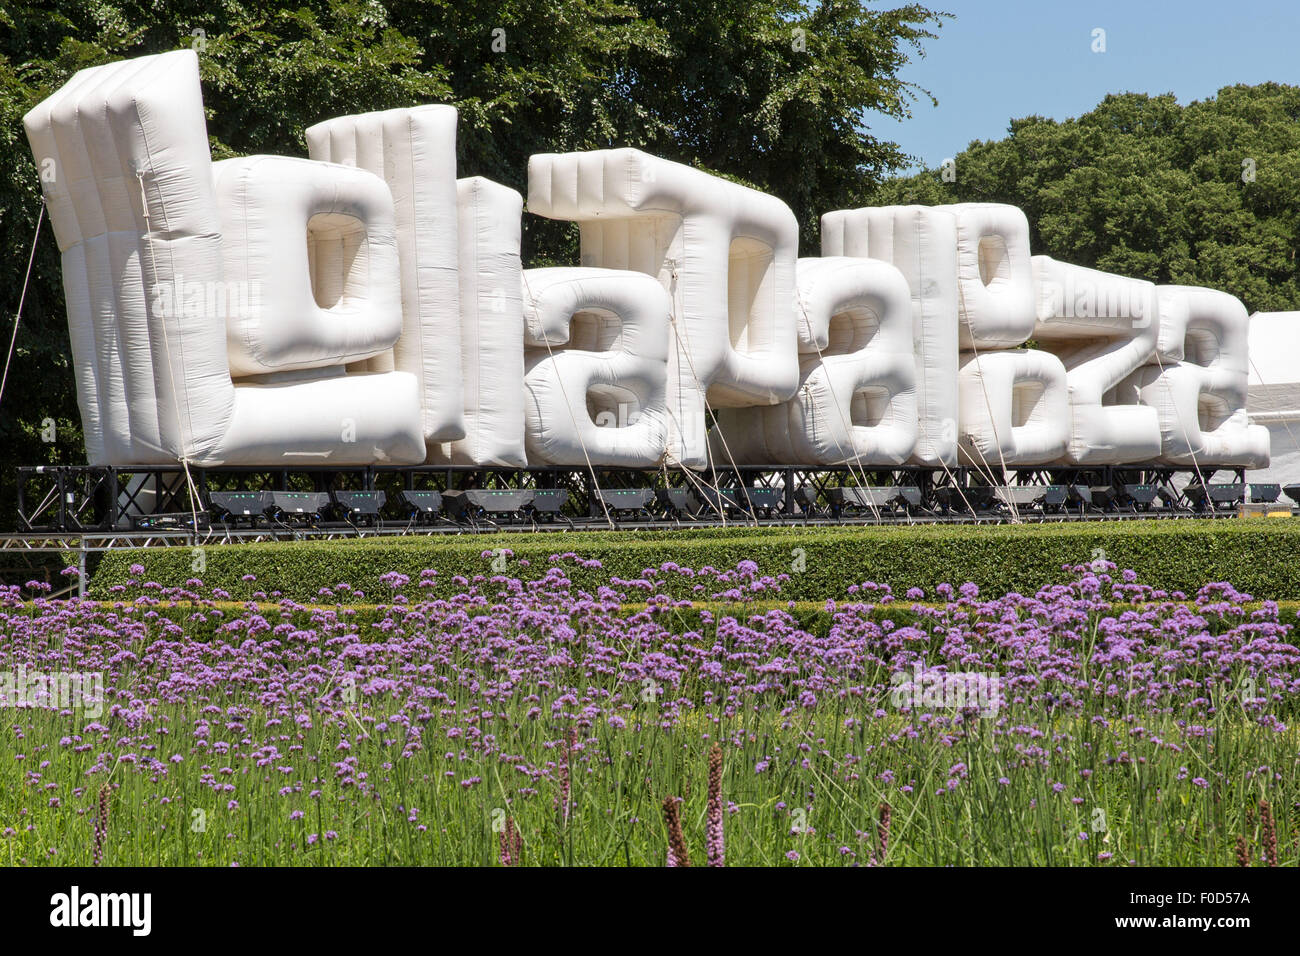 Chicago, Illinois, USA. 31st July, 2015. The large blowup balloon Lollapalooza sign welcomes fans to the 2015 Lollapalooza Music Festival at Grant Park in Chicago, Illinois © Daniel DeSlover/ZUMA Wire/Alamy Live News Stock Photo